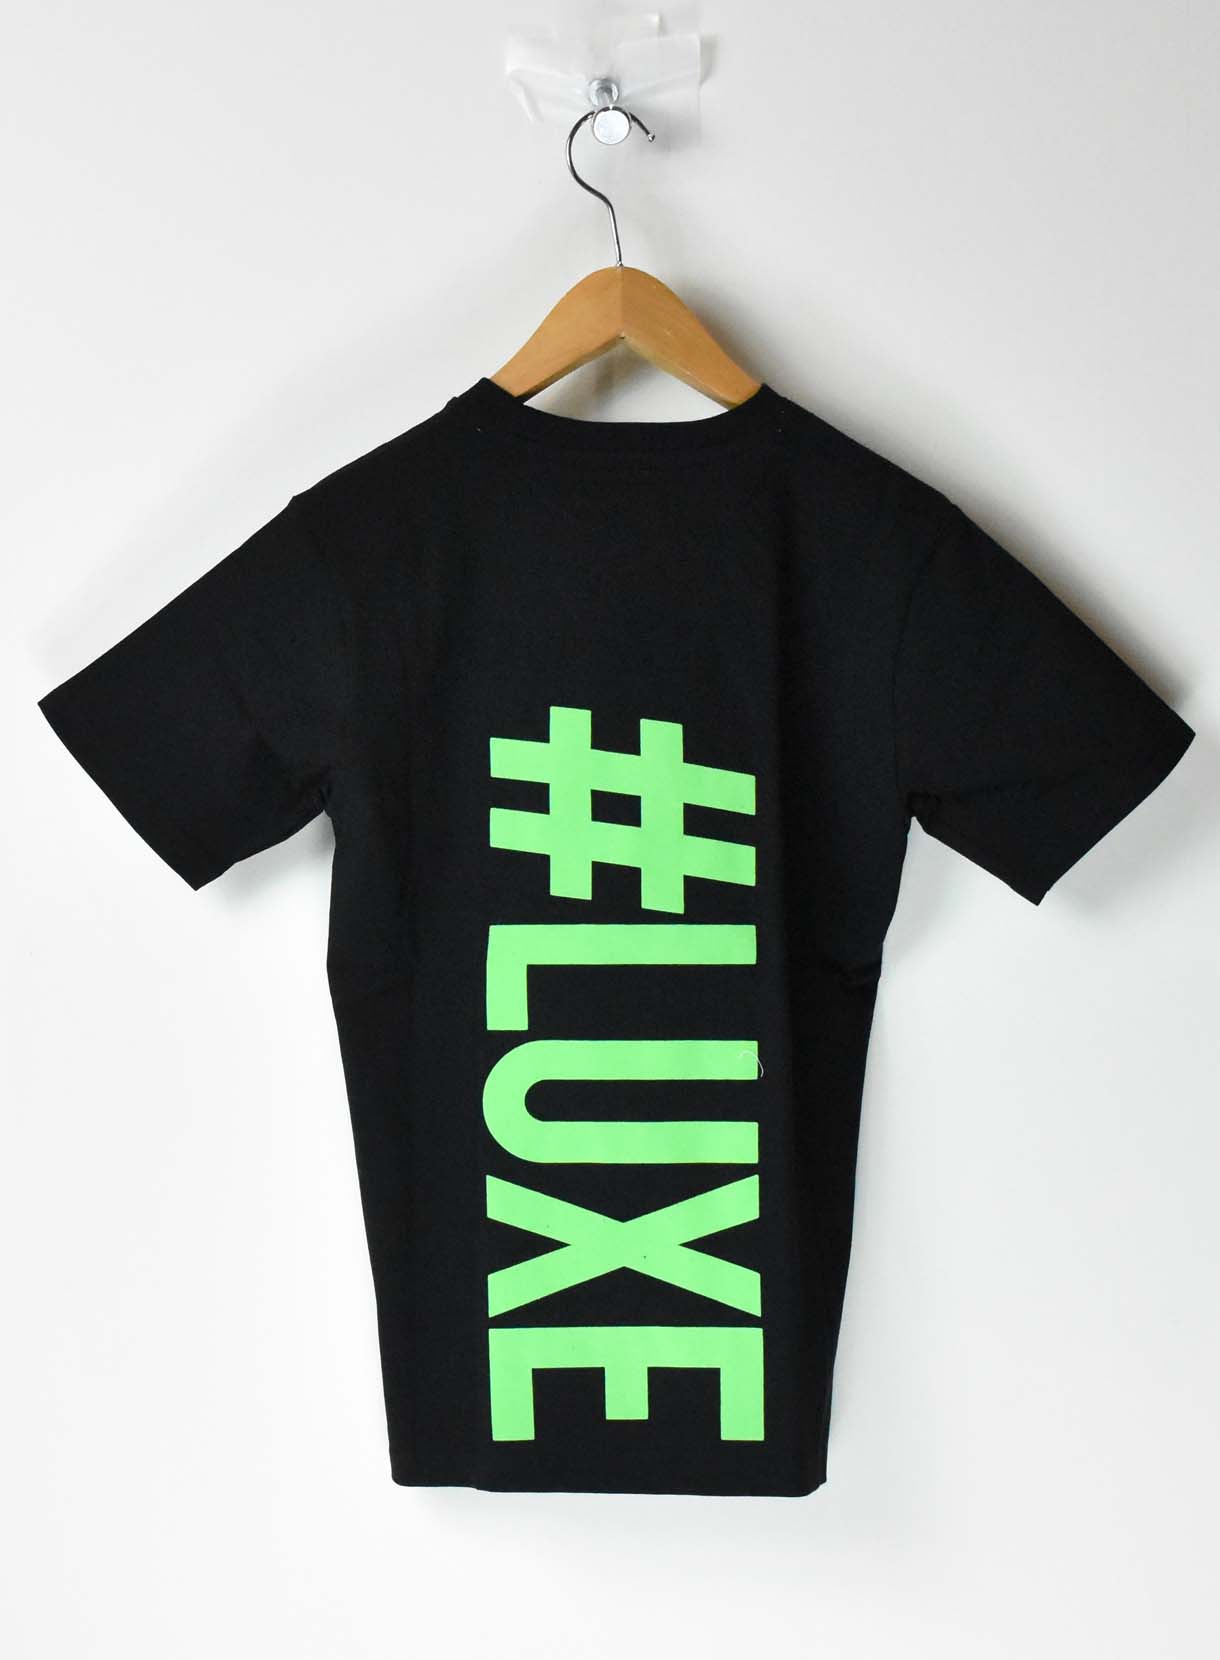 LUXE ロゴTシャツ